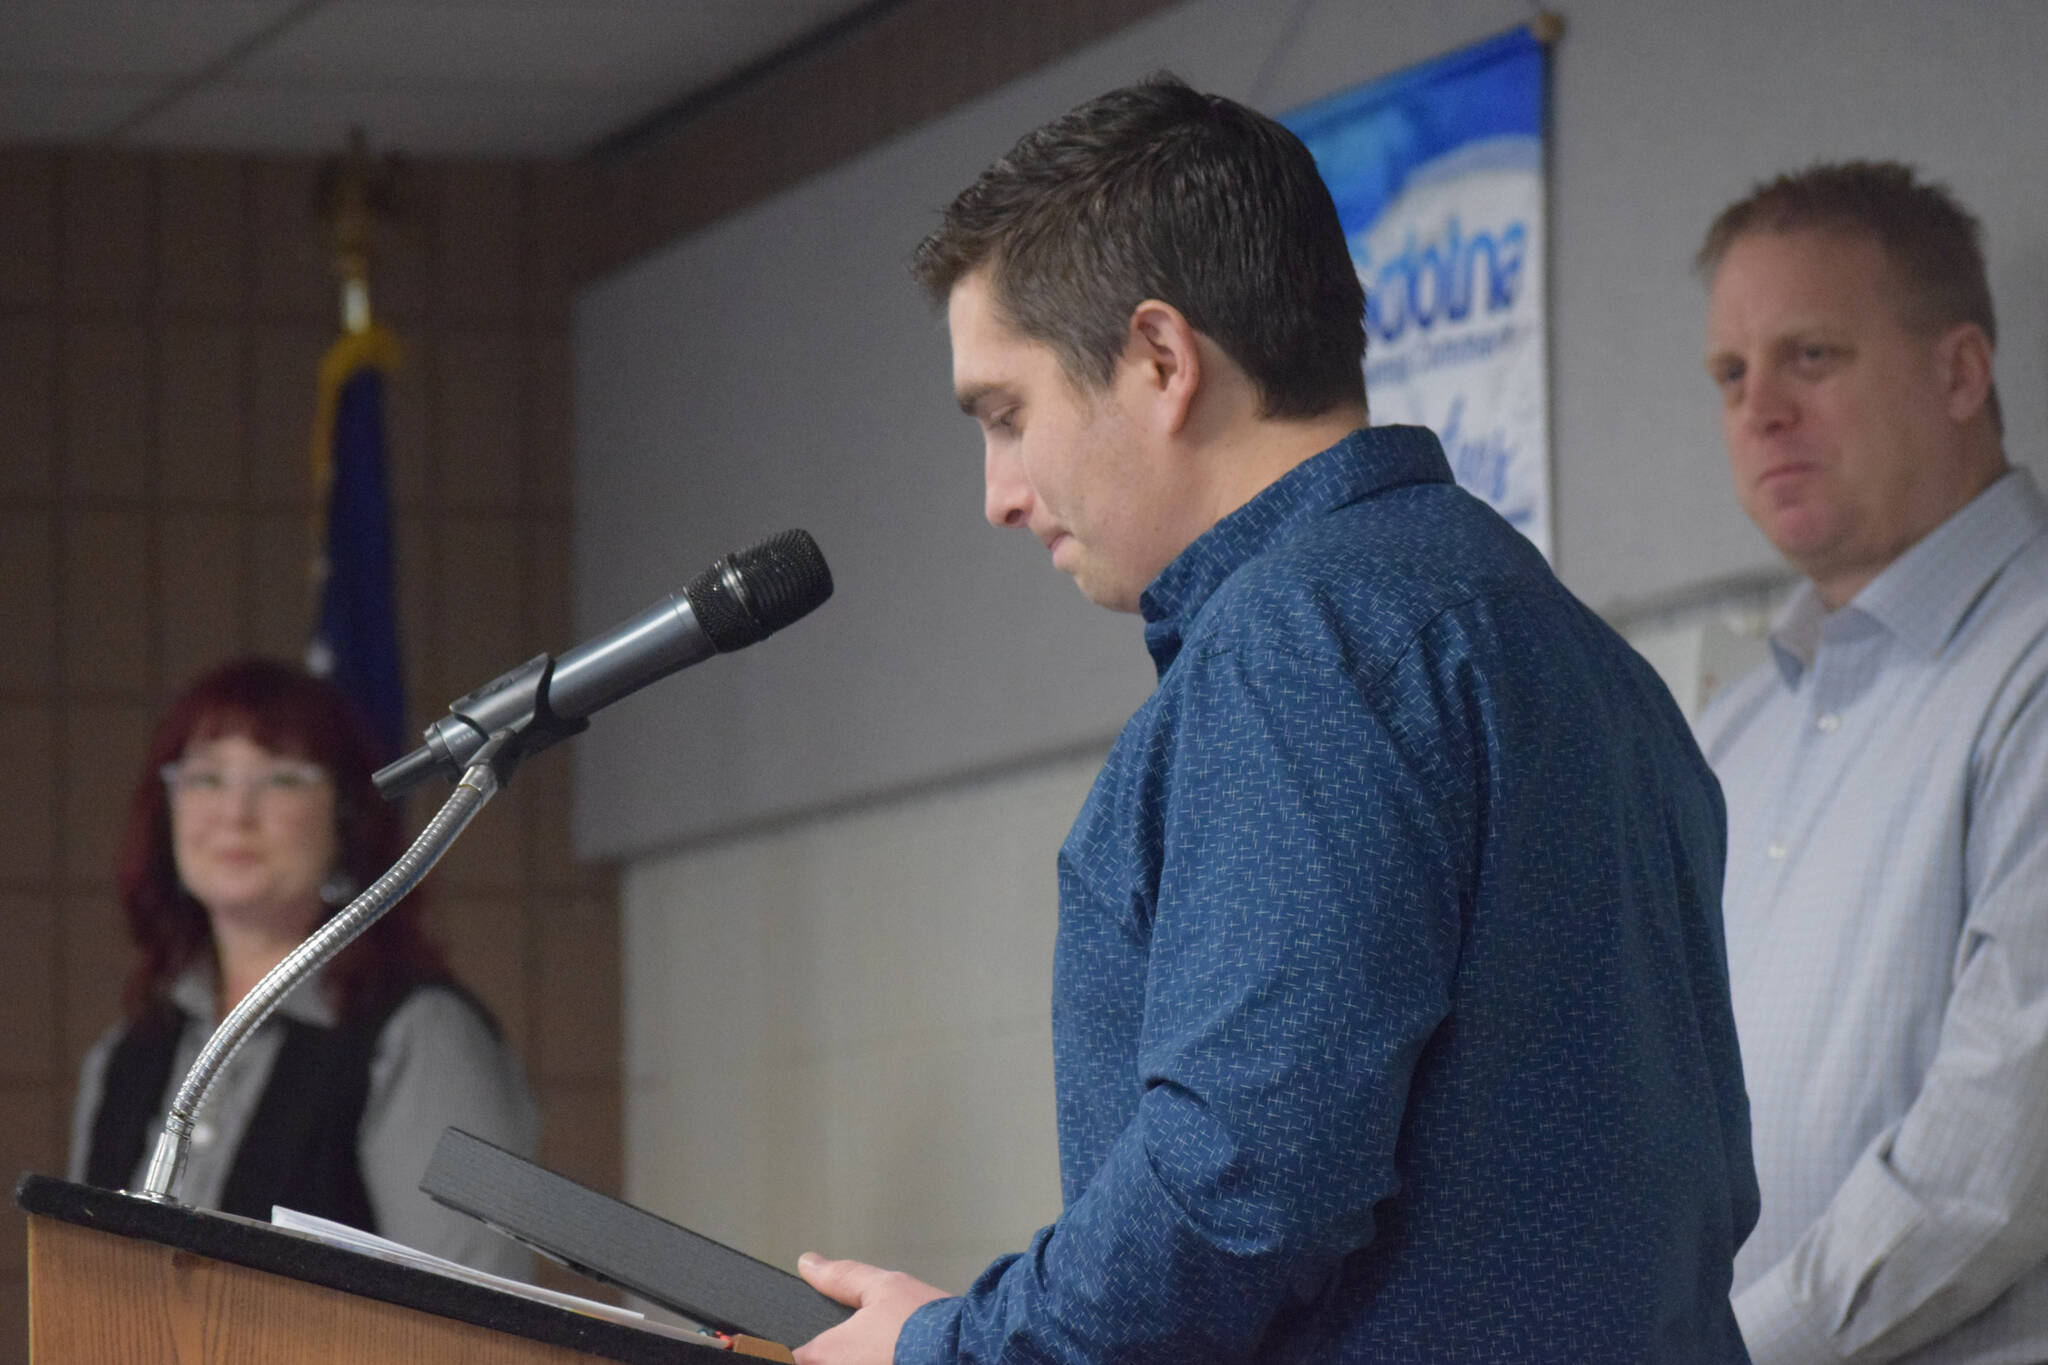 Justin Ruffridge accepts the Soldotna Chamber of Commerce’s person of the year award for his pandemic response work at Soldotna Professional Pharmacy.